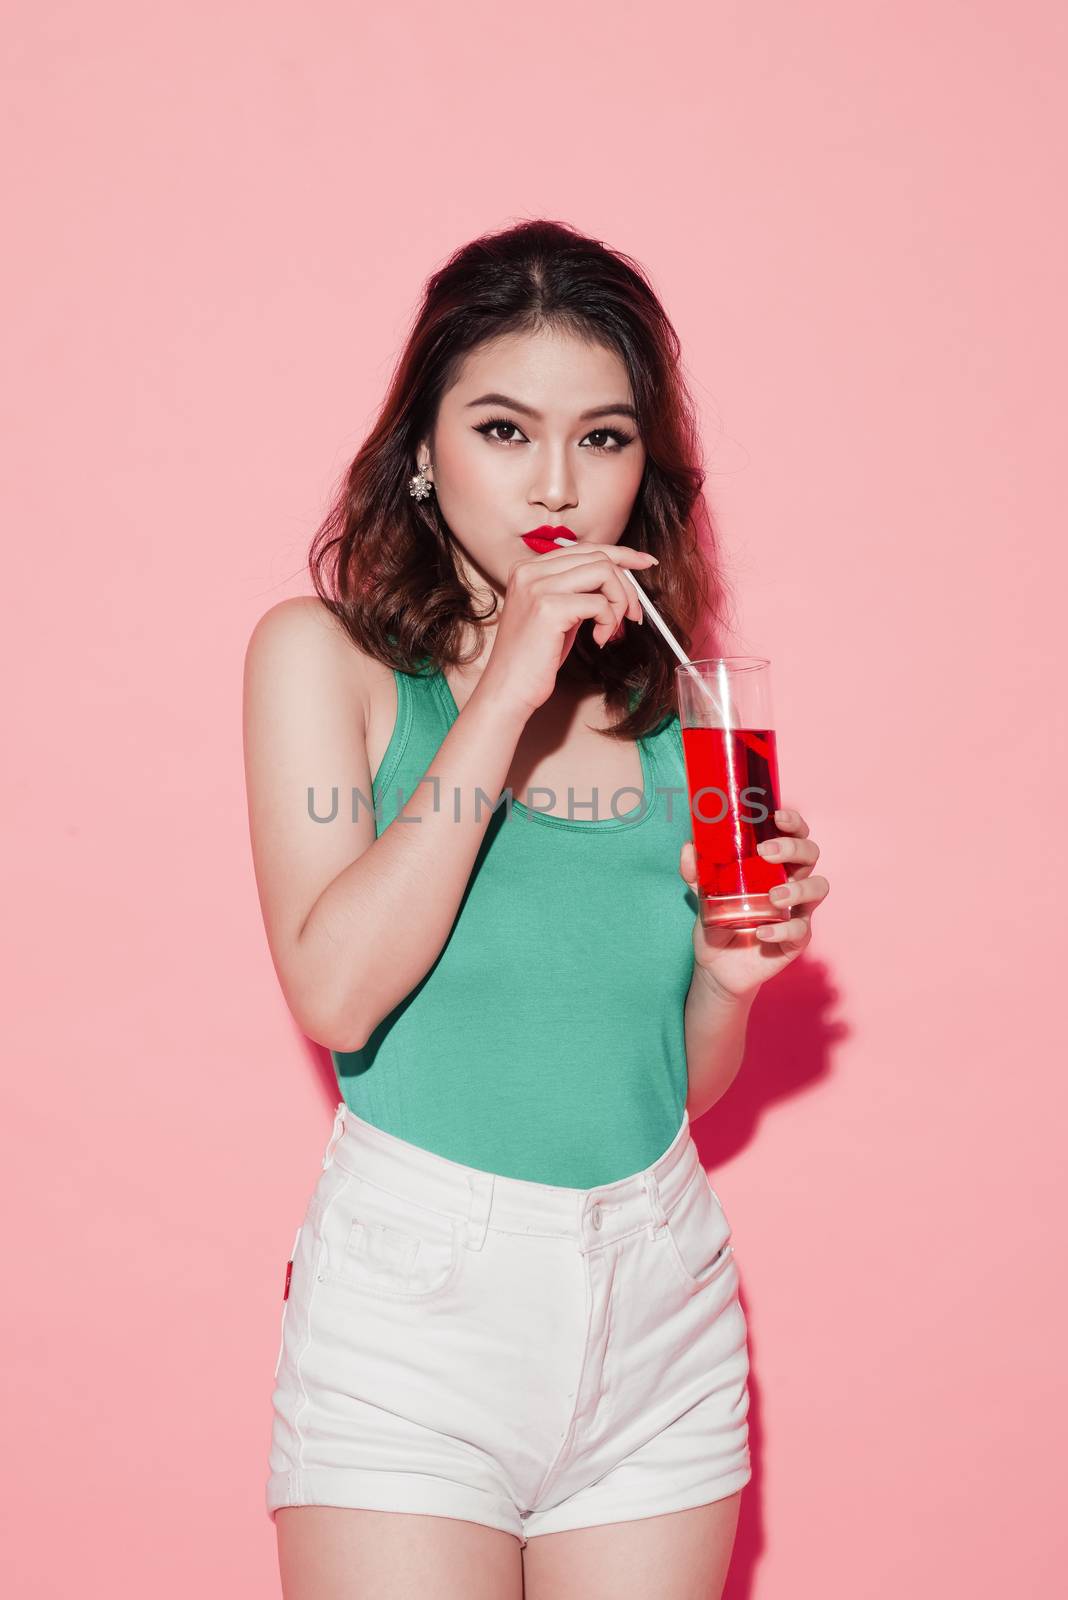 Happy fashion asian woman drinking champagne over pink background.